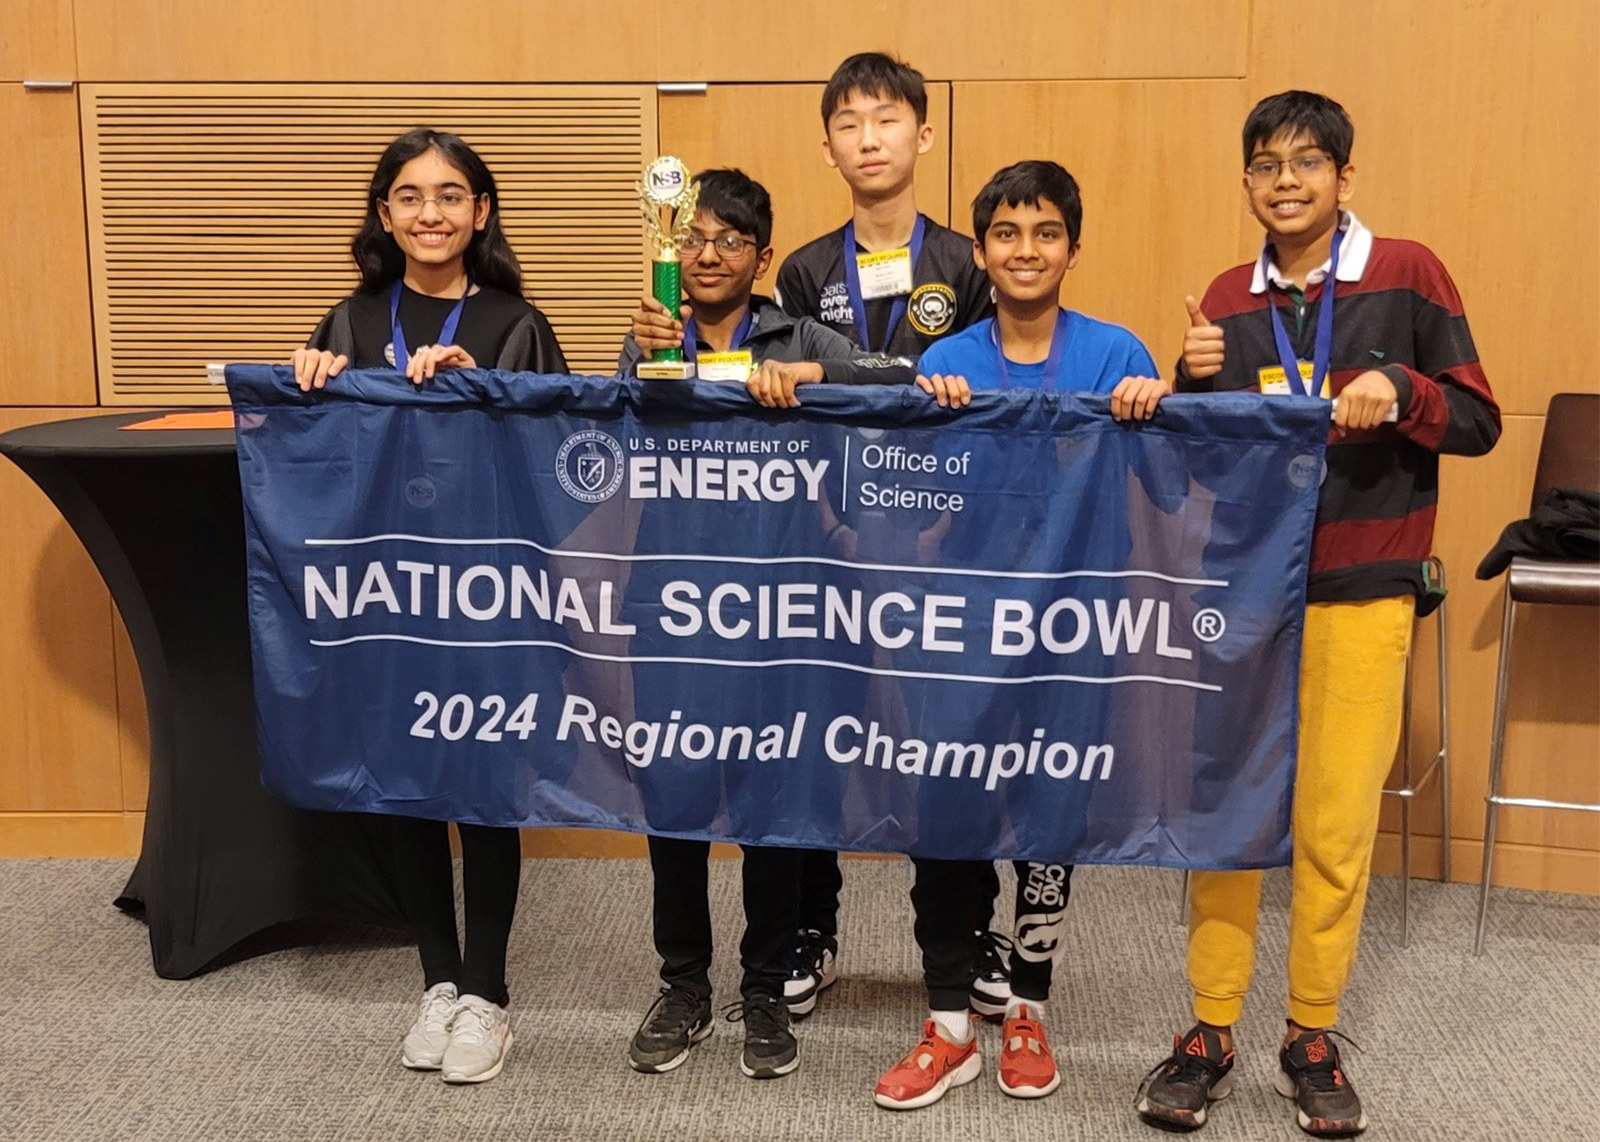 Five students holding National Science Bowl banner